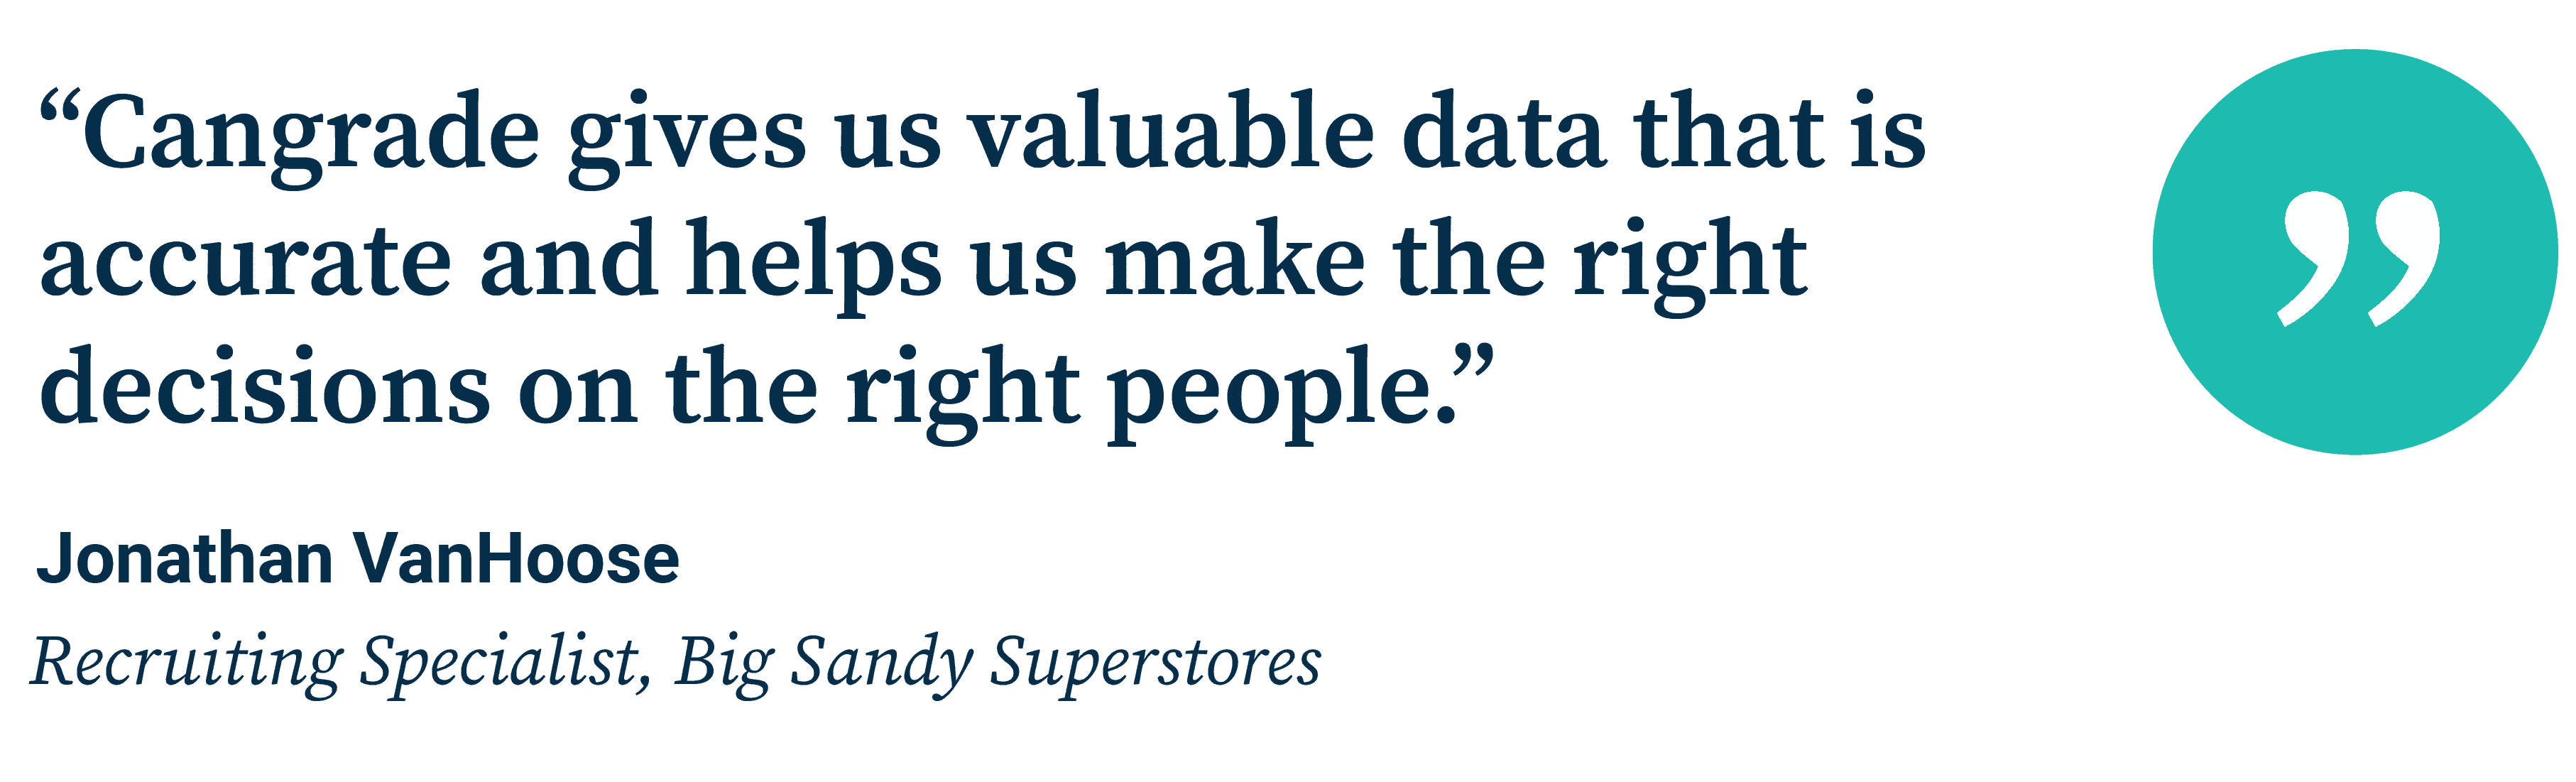 “Cangrade gives us valuable data that is accurate and helps us make the right decisions on the right people.” Jonathan VanHoose, Recruiting Specialist, Big Sandy Superstores